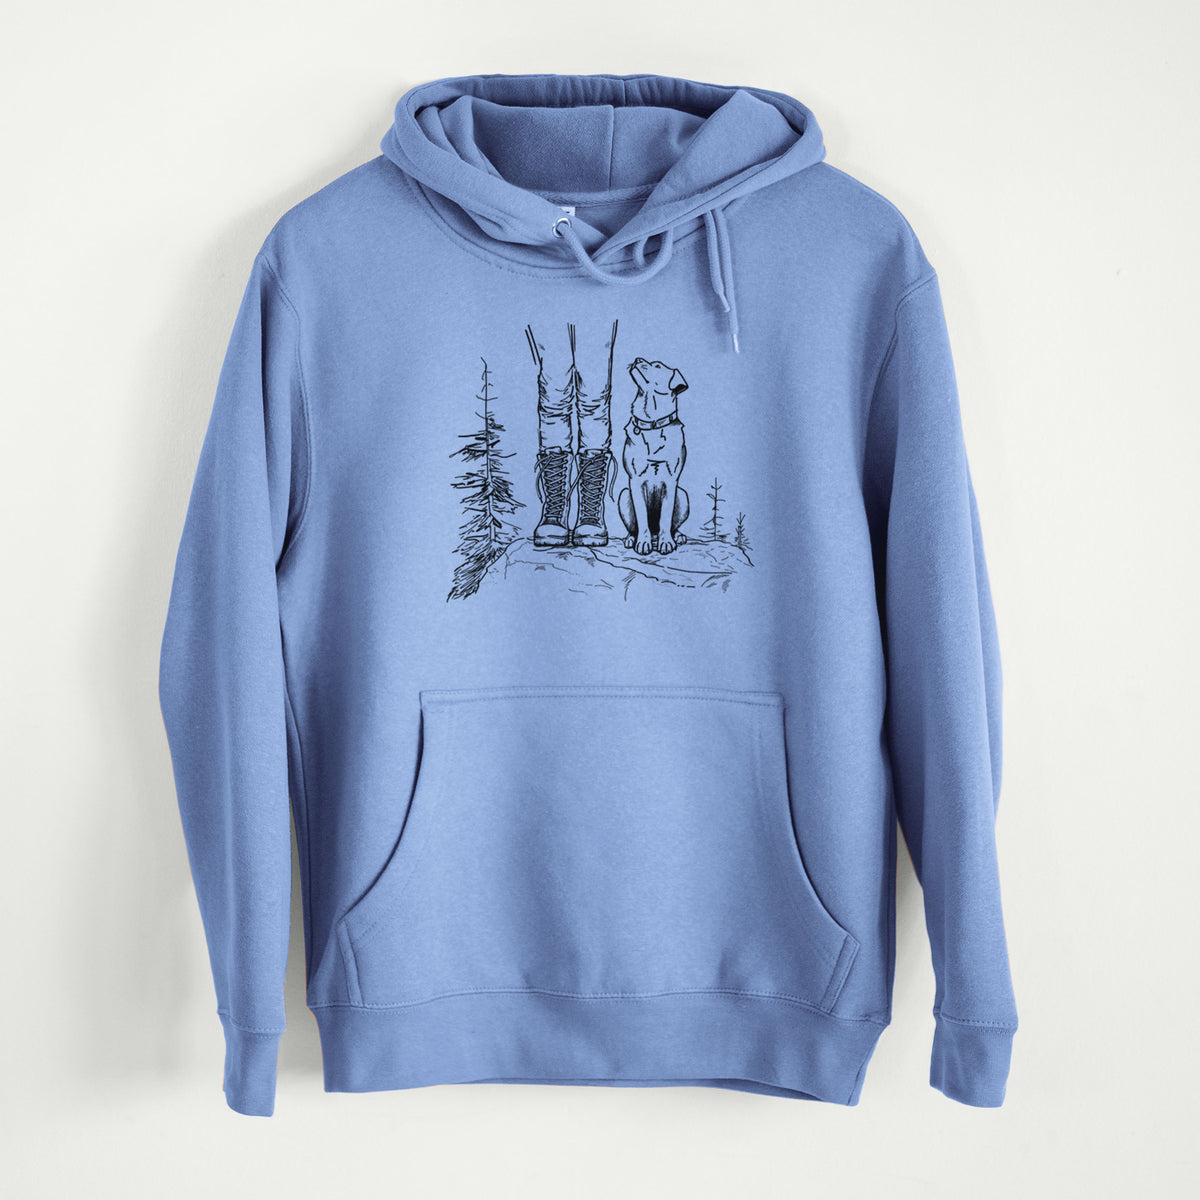 Trail Companions - Hiking with Dogs  - Mid-Weight Unisex Premium Blend Hoodie